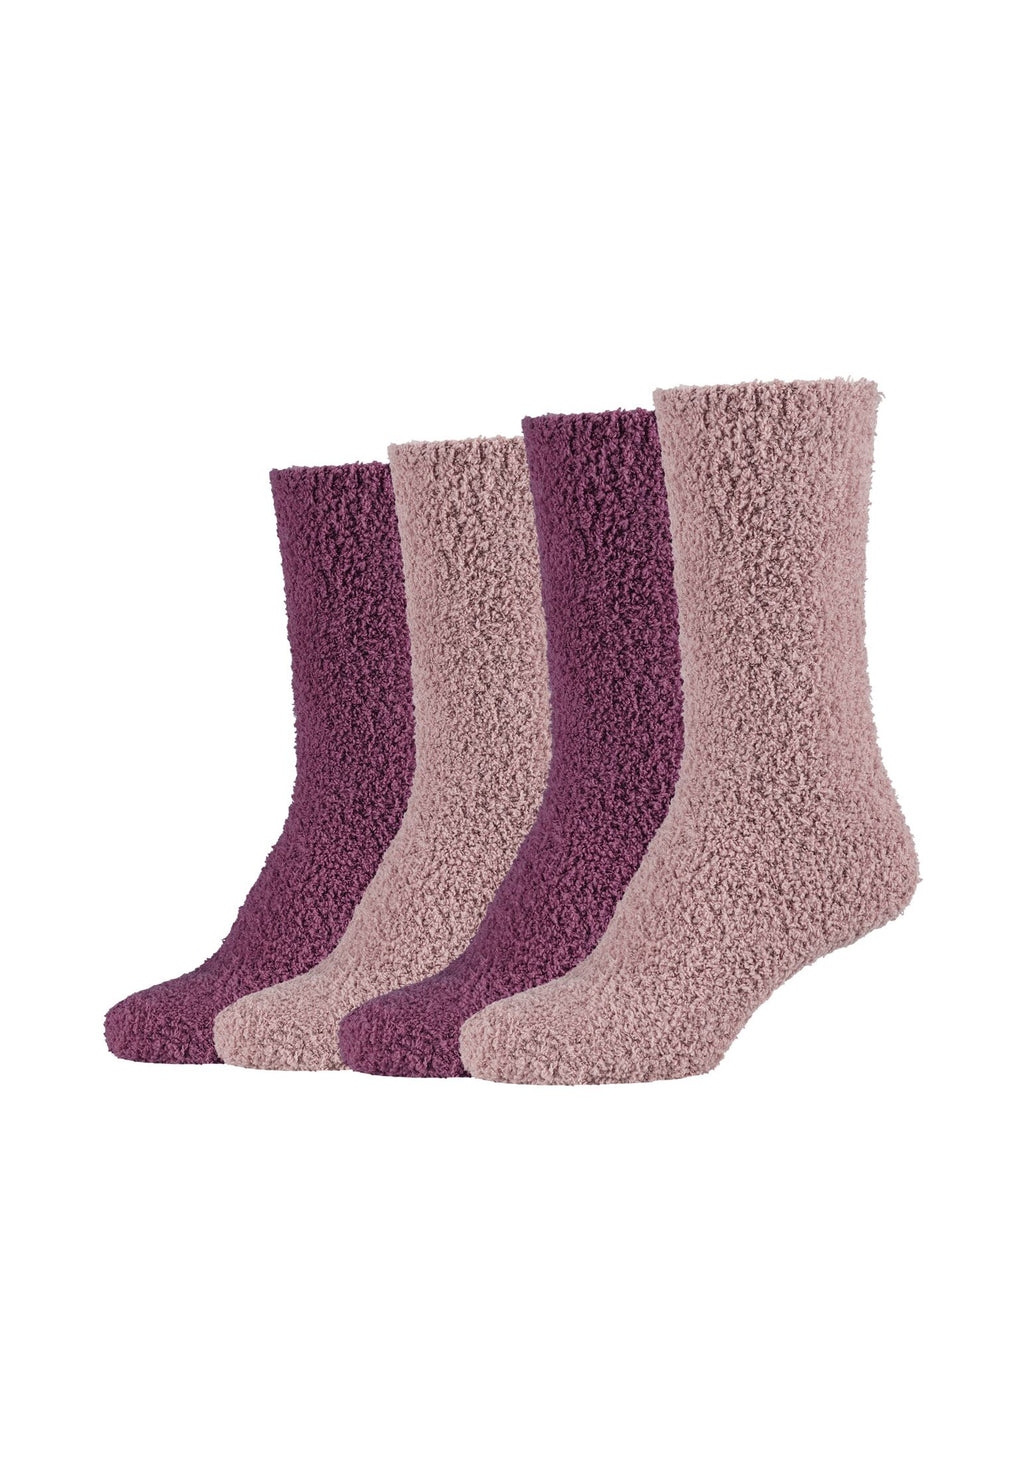 – ONSKINERY Pack Recycled 4er Cosy Socken Polyester mit